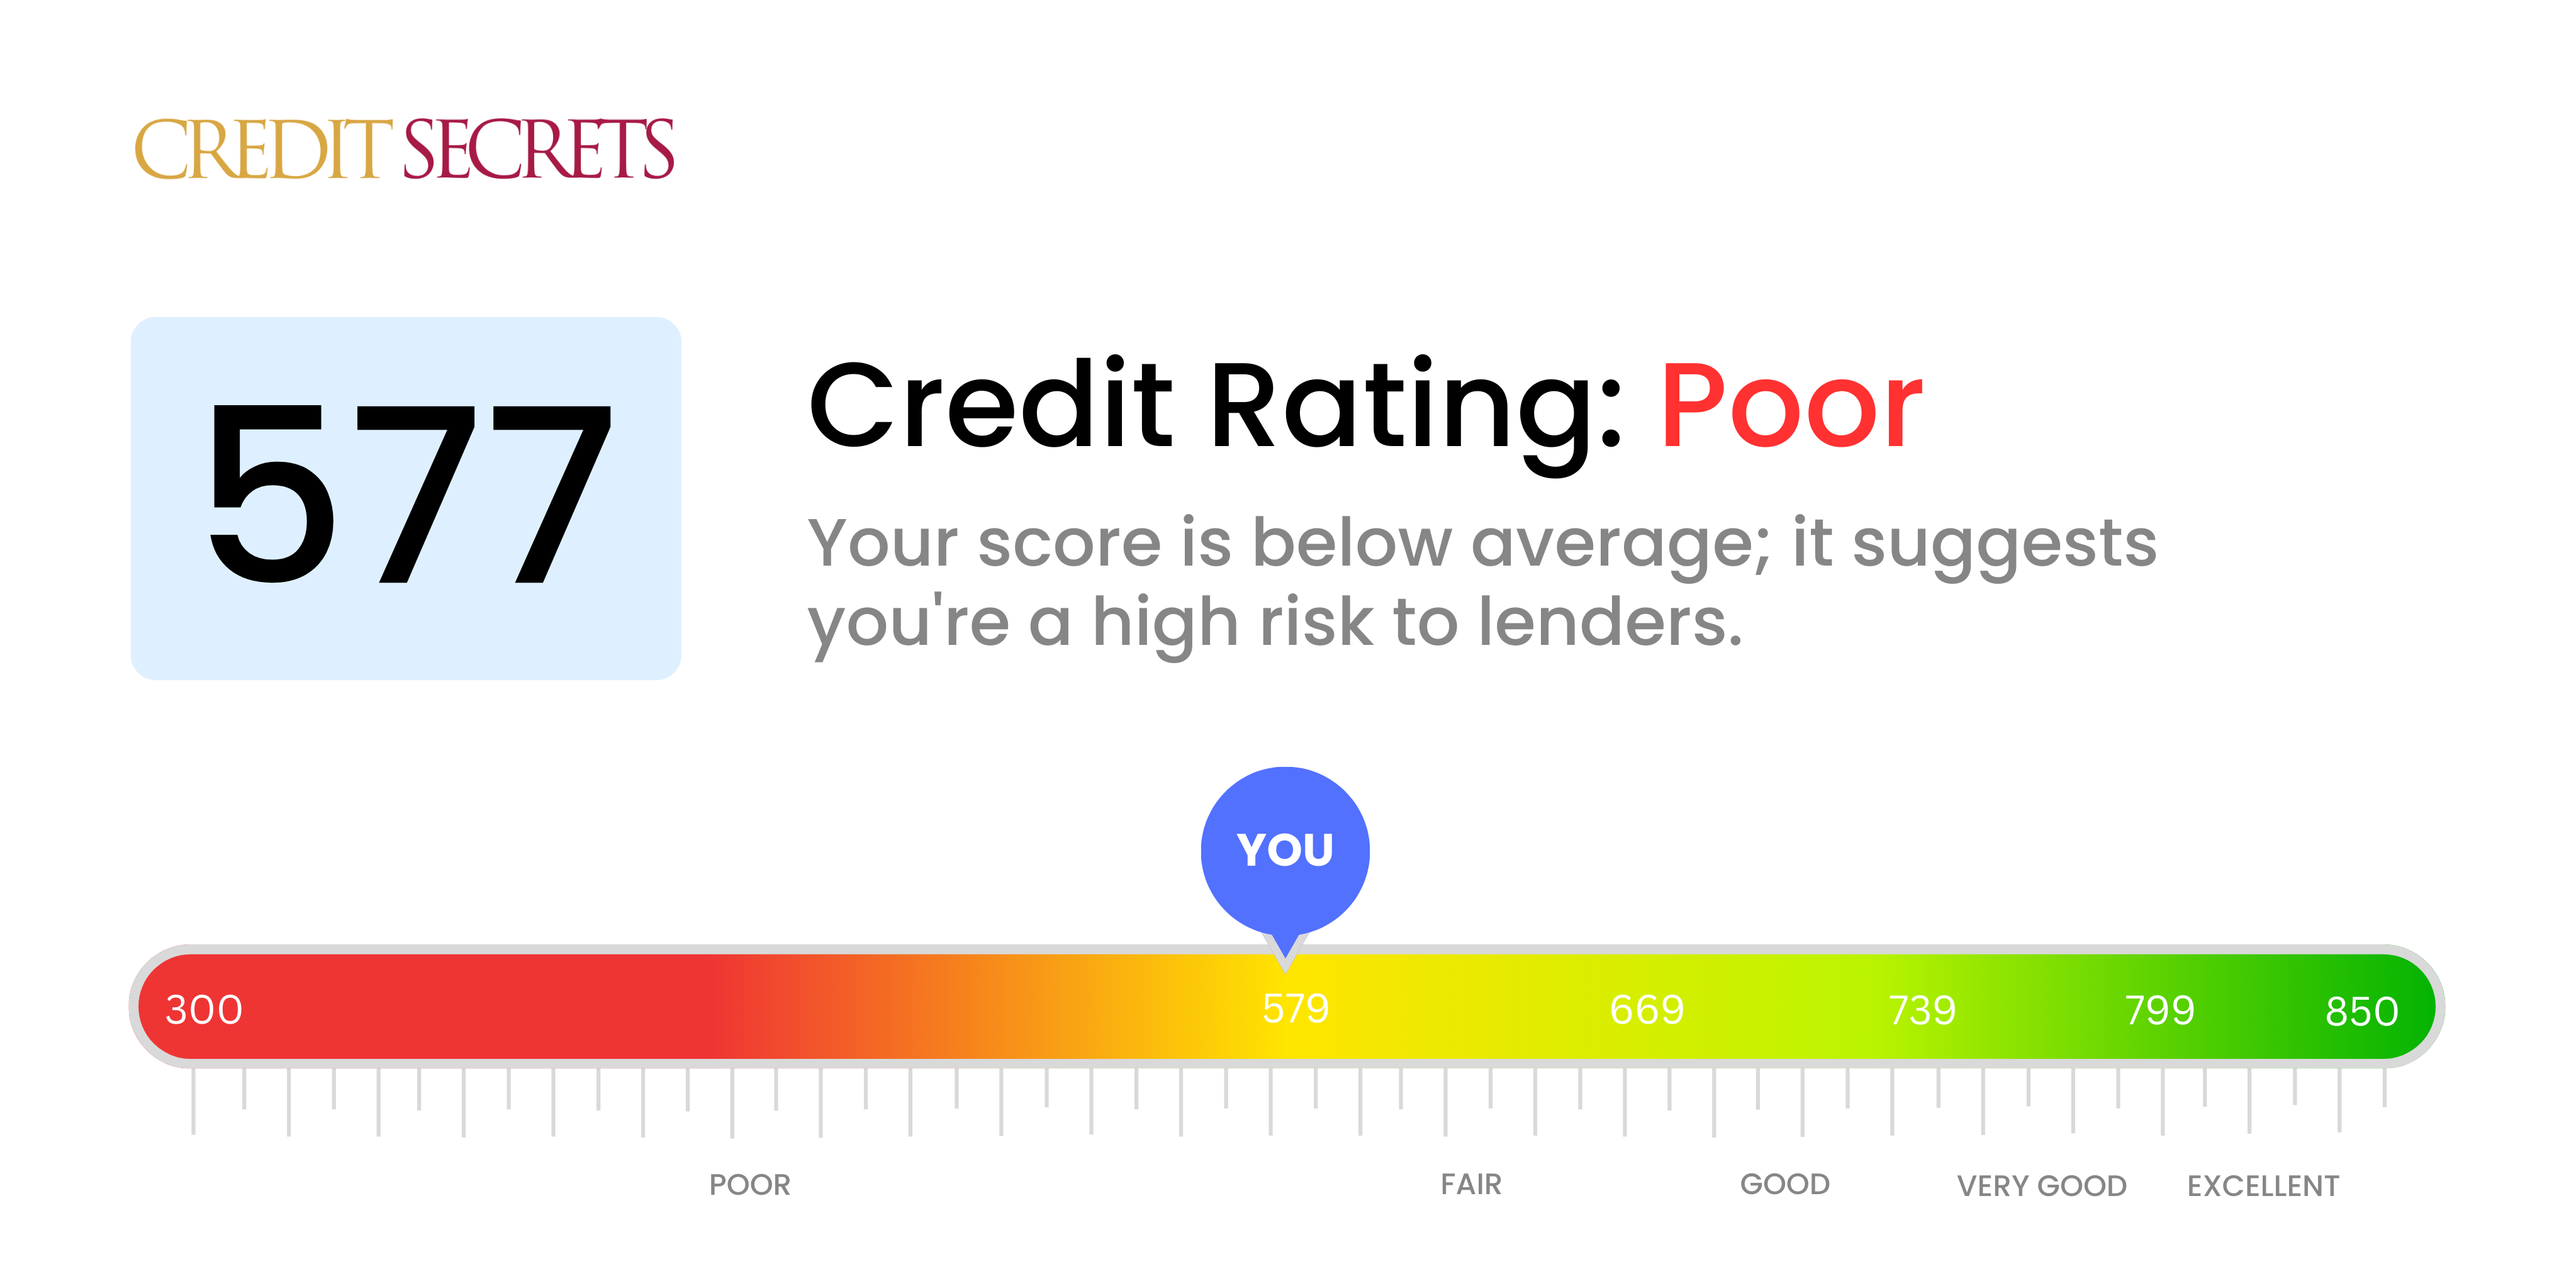 Is 577 a good credit score?